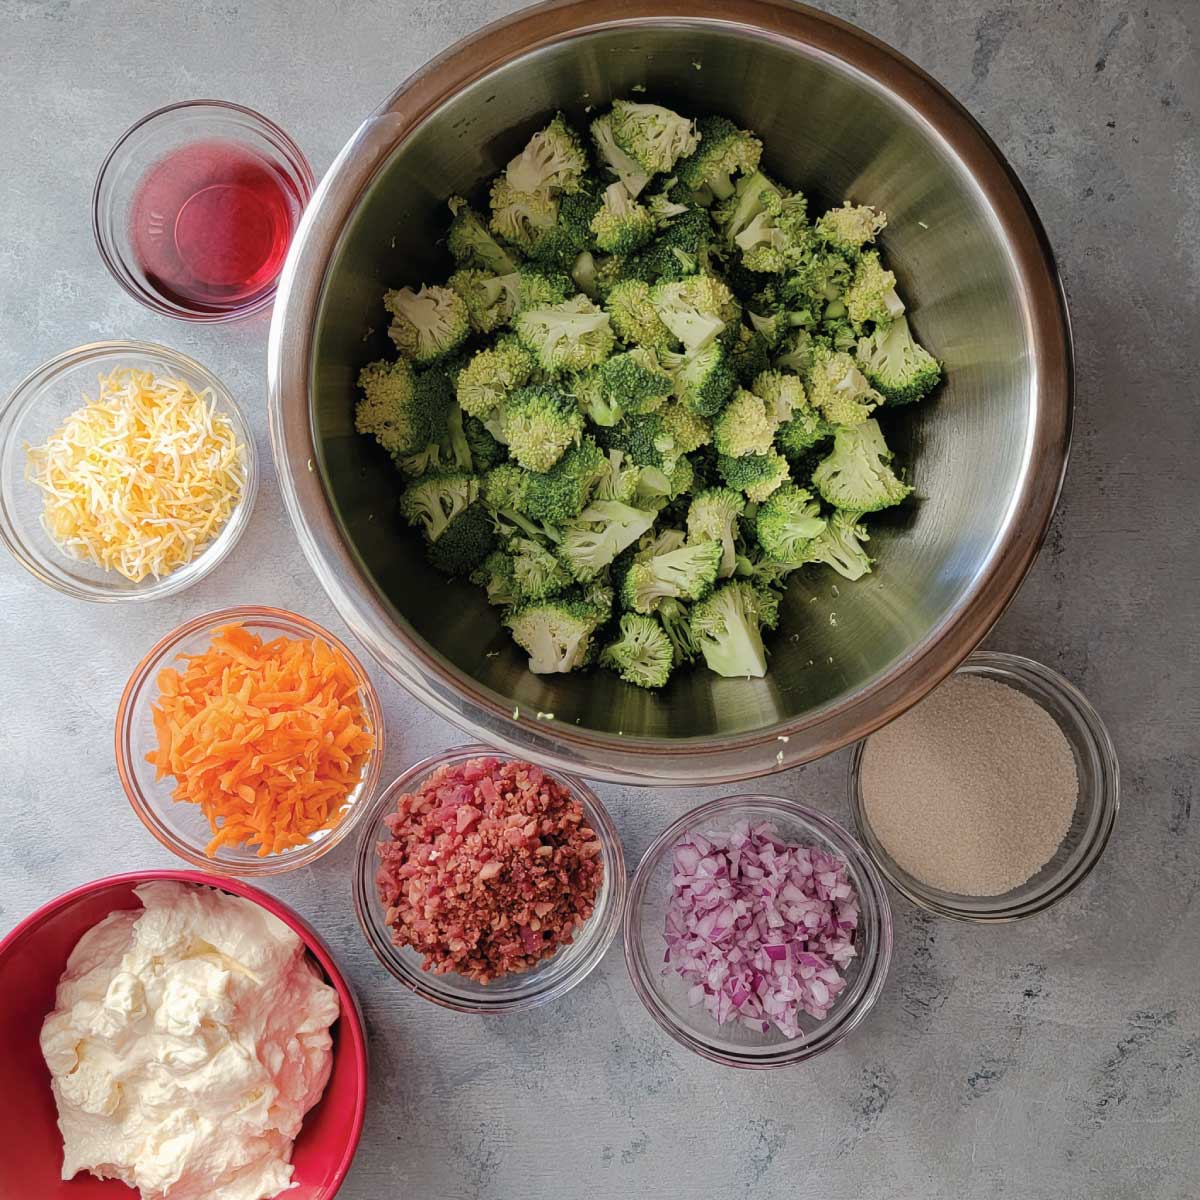 Ingredients prepped for making broccoli salad.